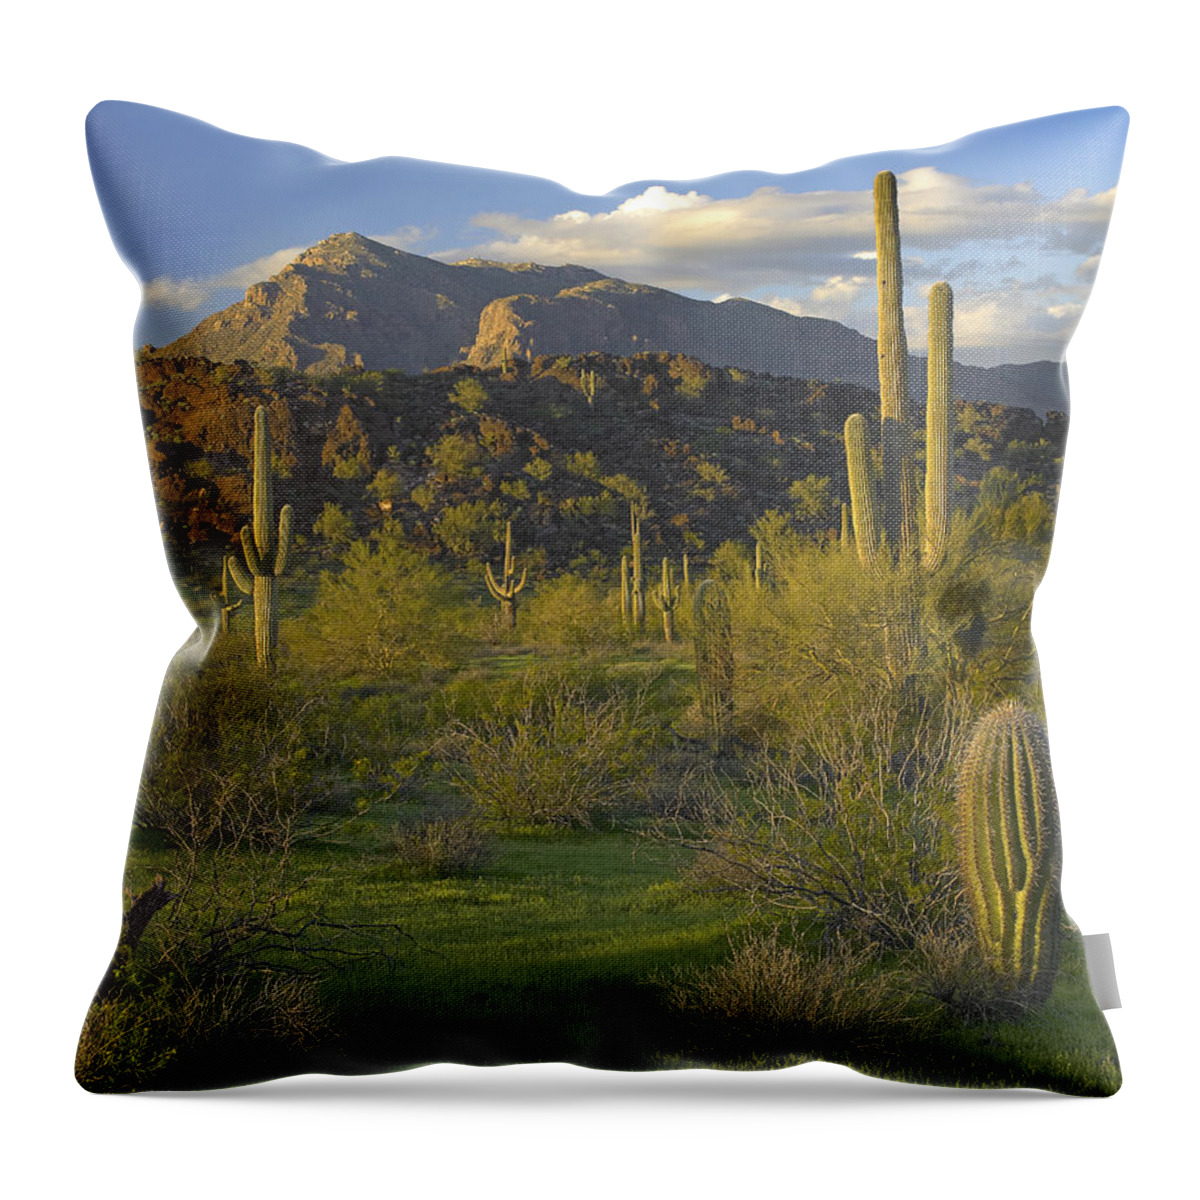 00175222 Throw Pillow featuring the photograph Saguaro Cacti Picacho Mountains Picacho by Tim Fitzharris